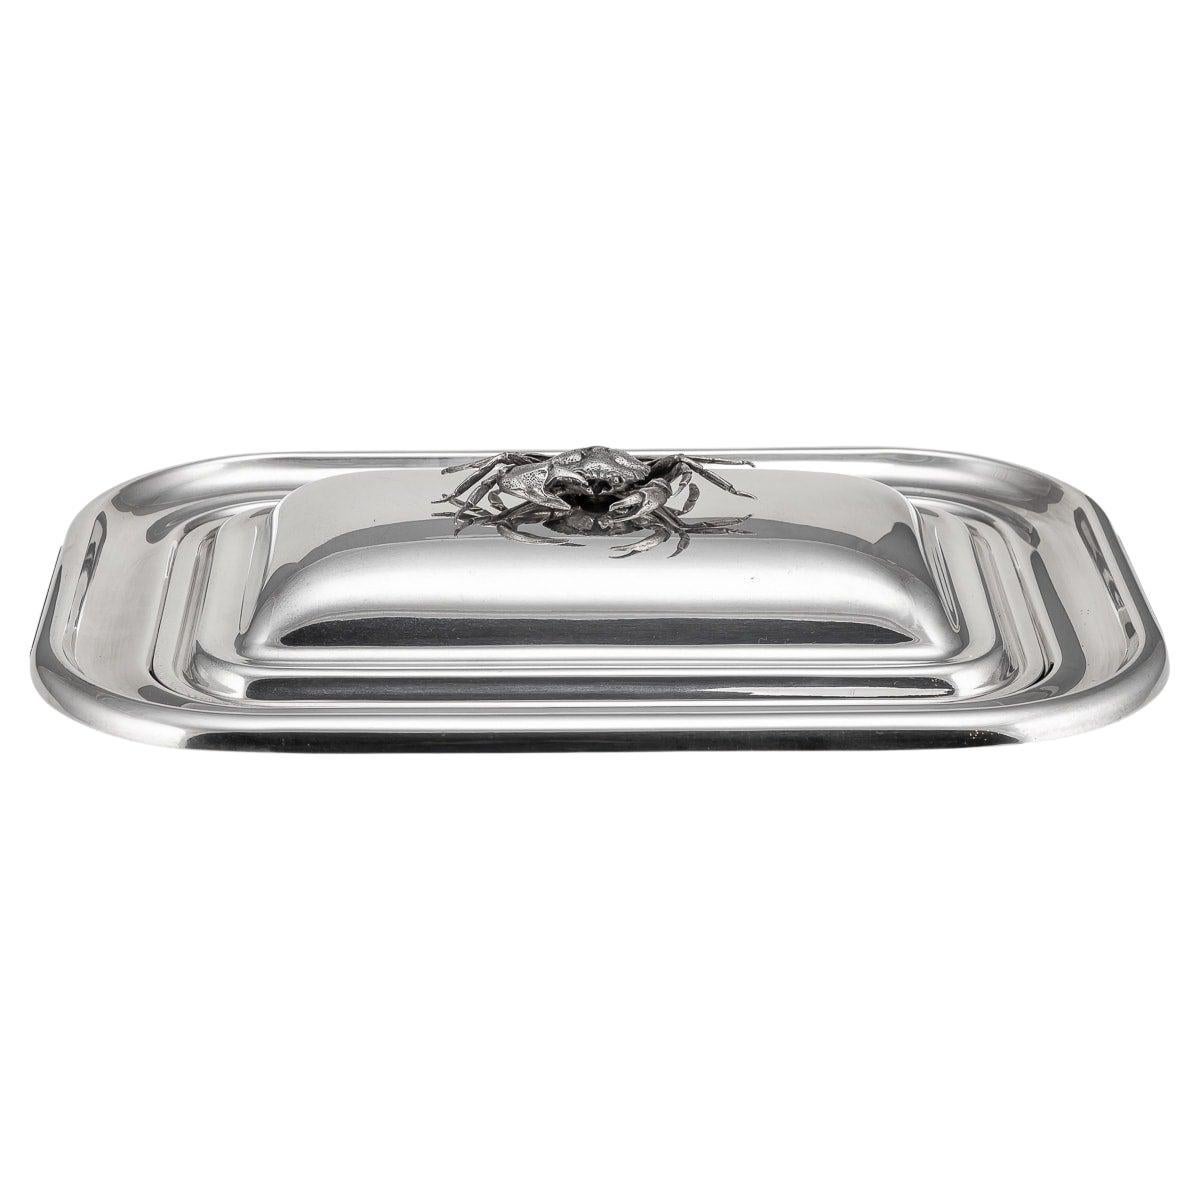 20th Century Italian Silver Plated Crab Serving Dish, c.1960 For Sale